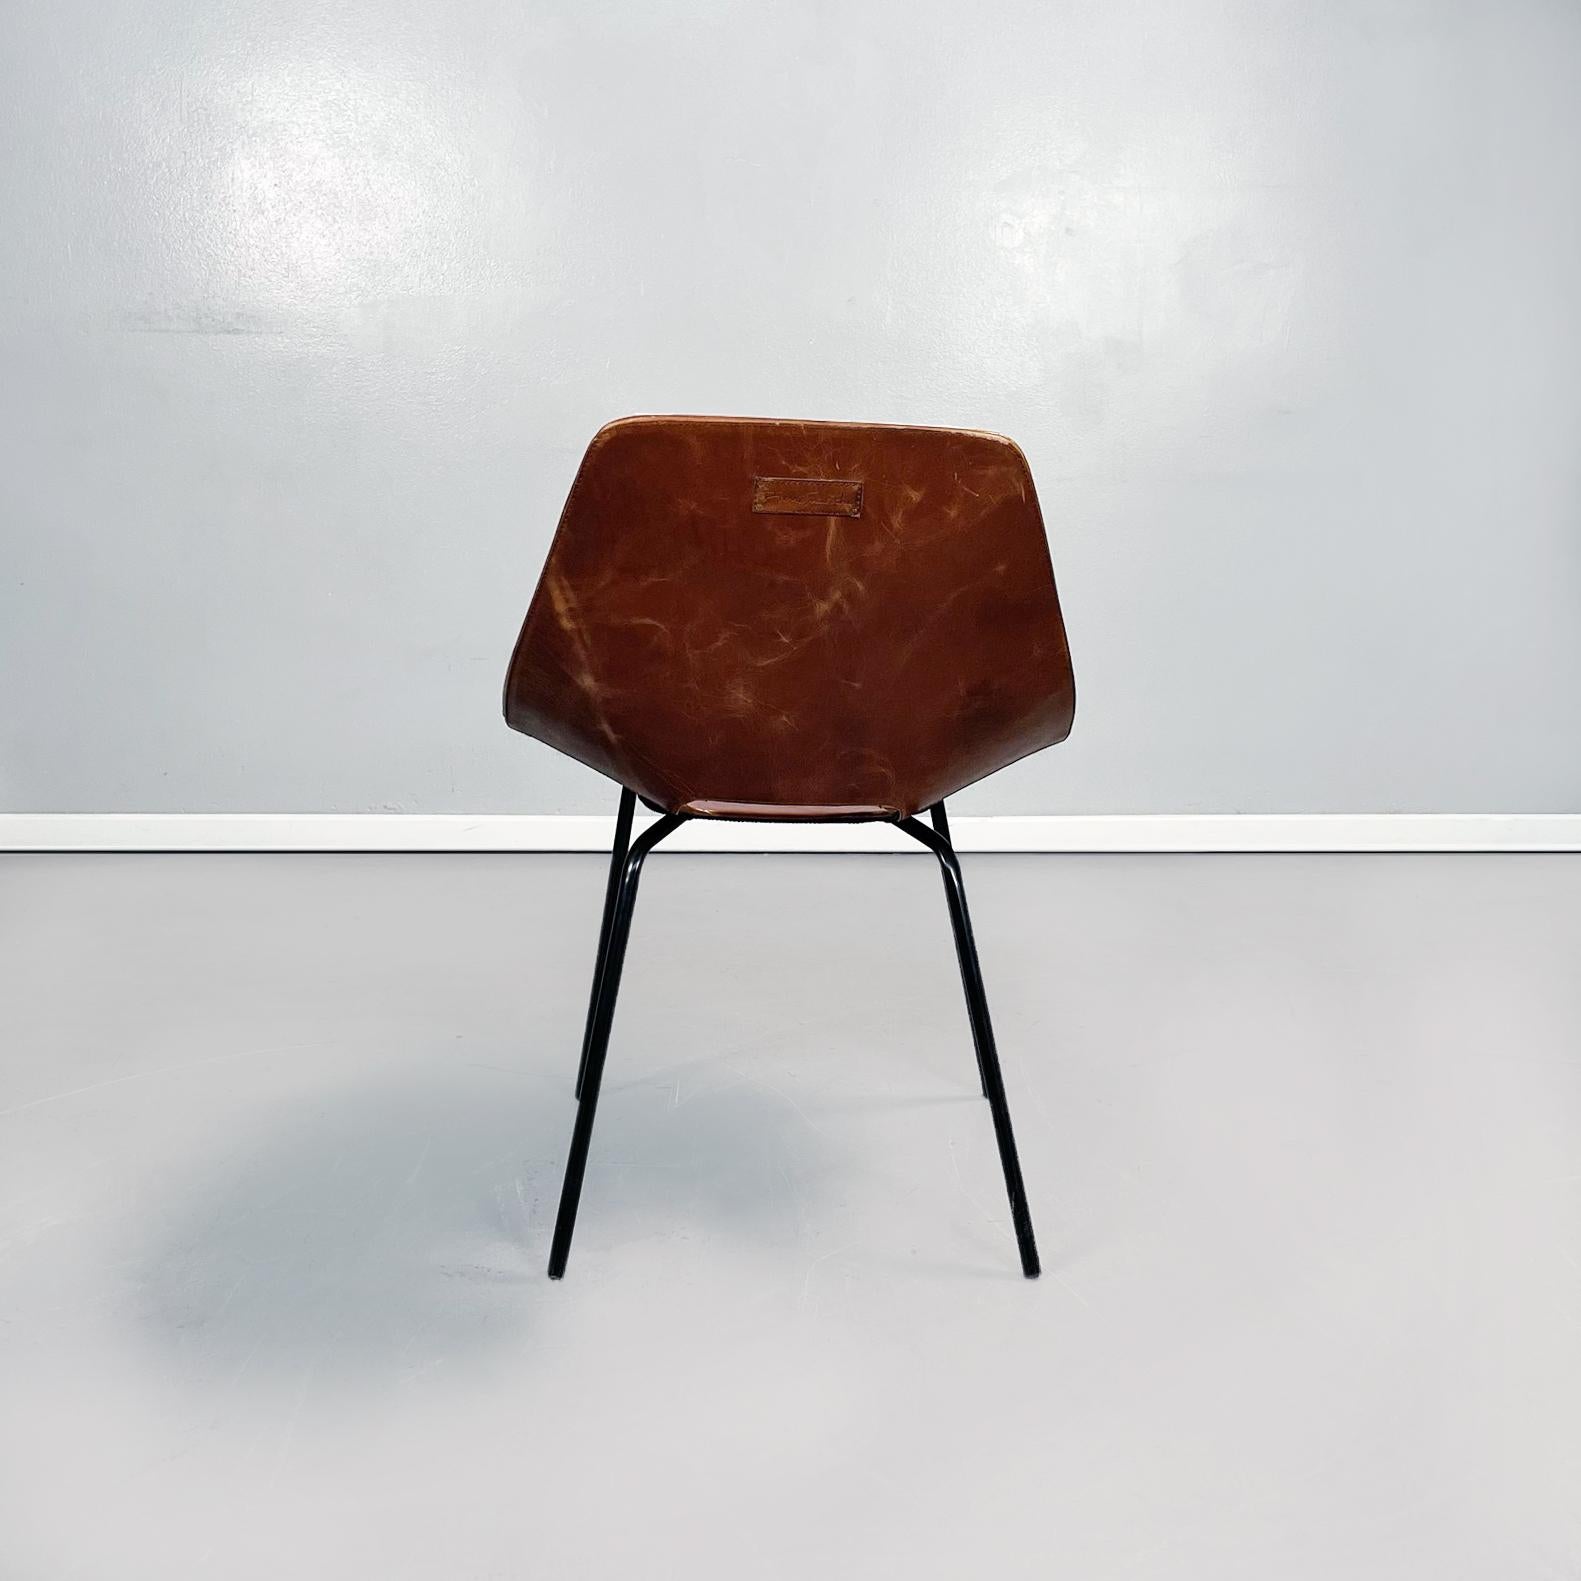 Mid-20th Century French Mid-Century Modern Brown Leather Metal Chair Tonneau by Guariche, 1950s